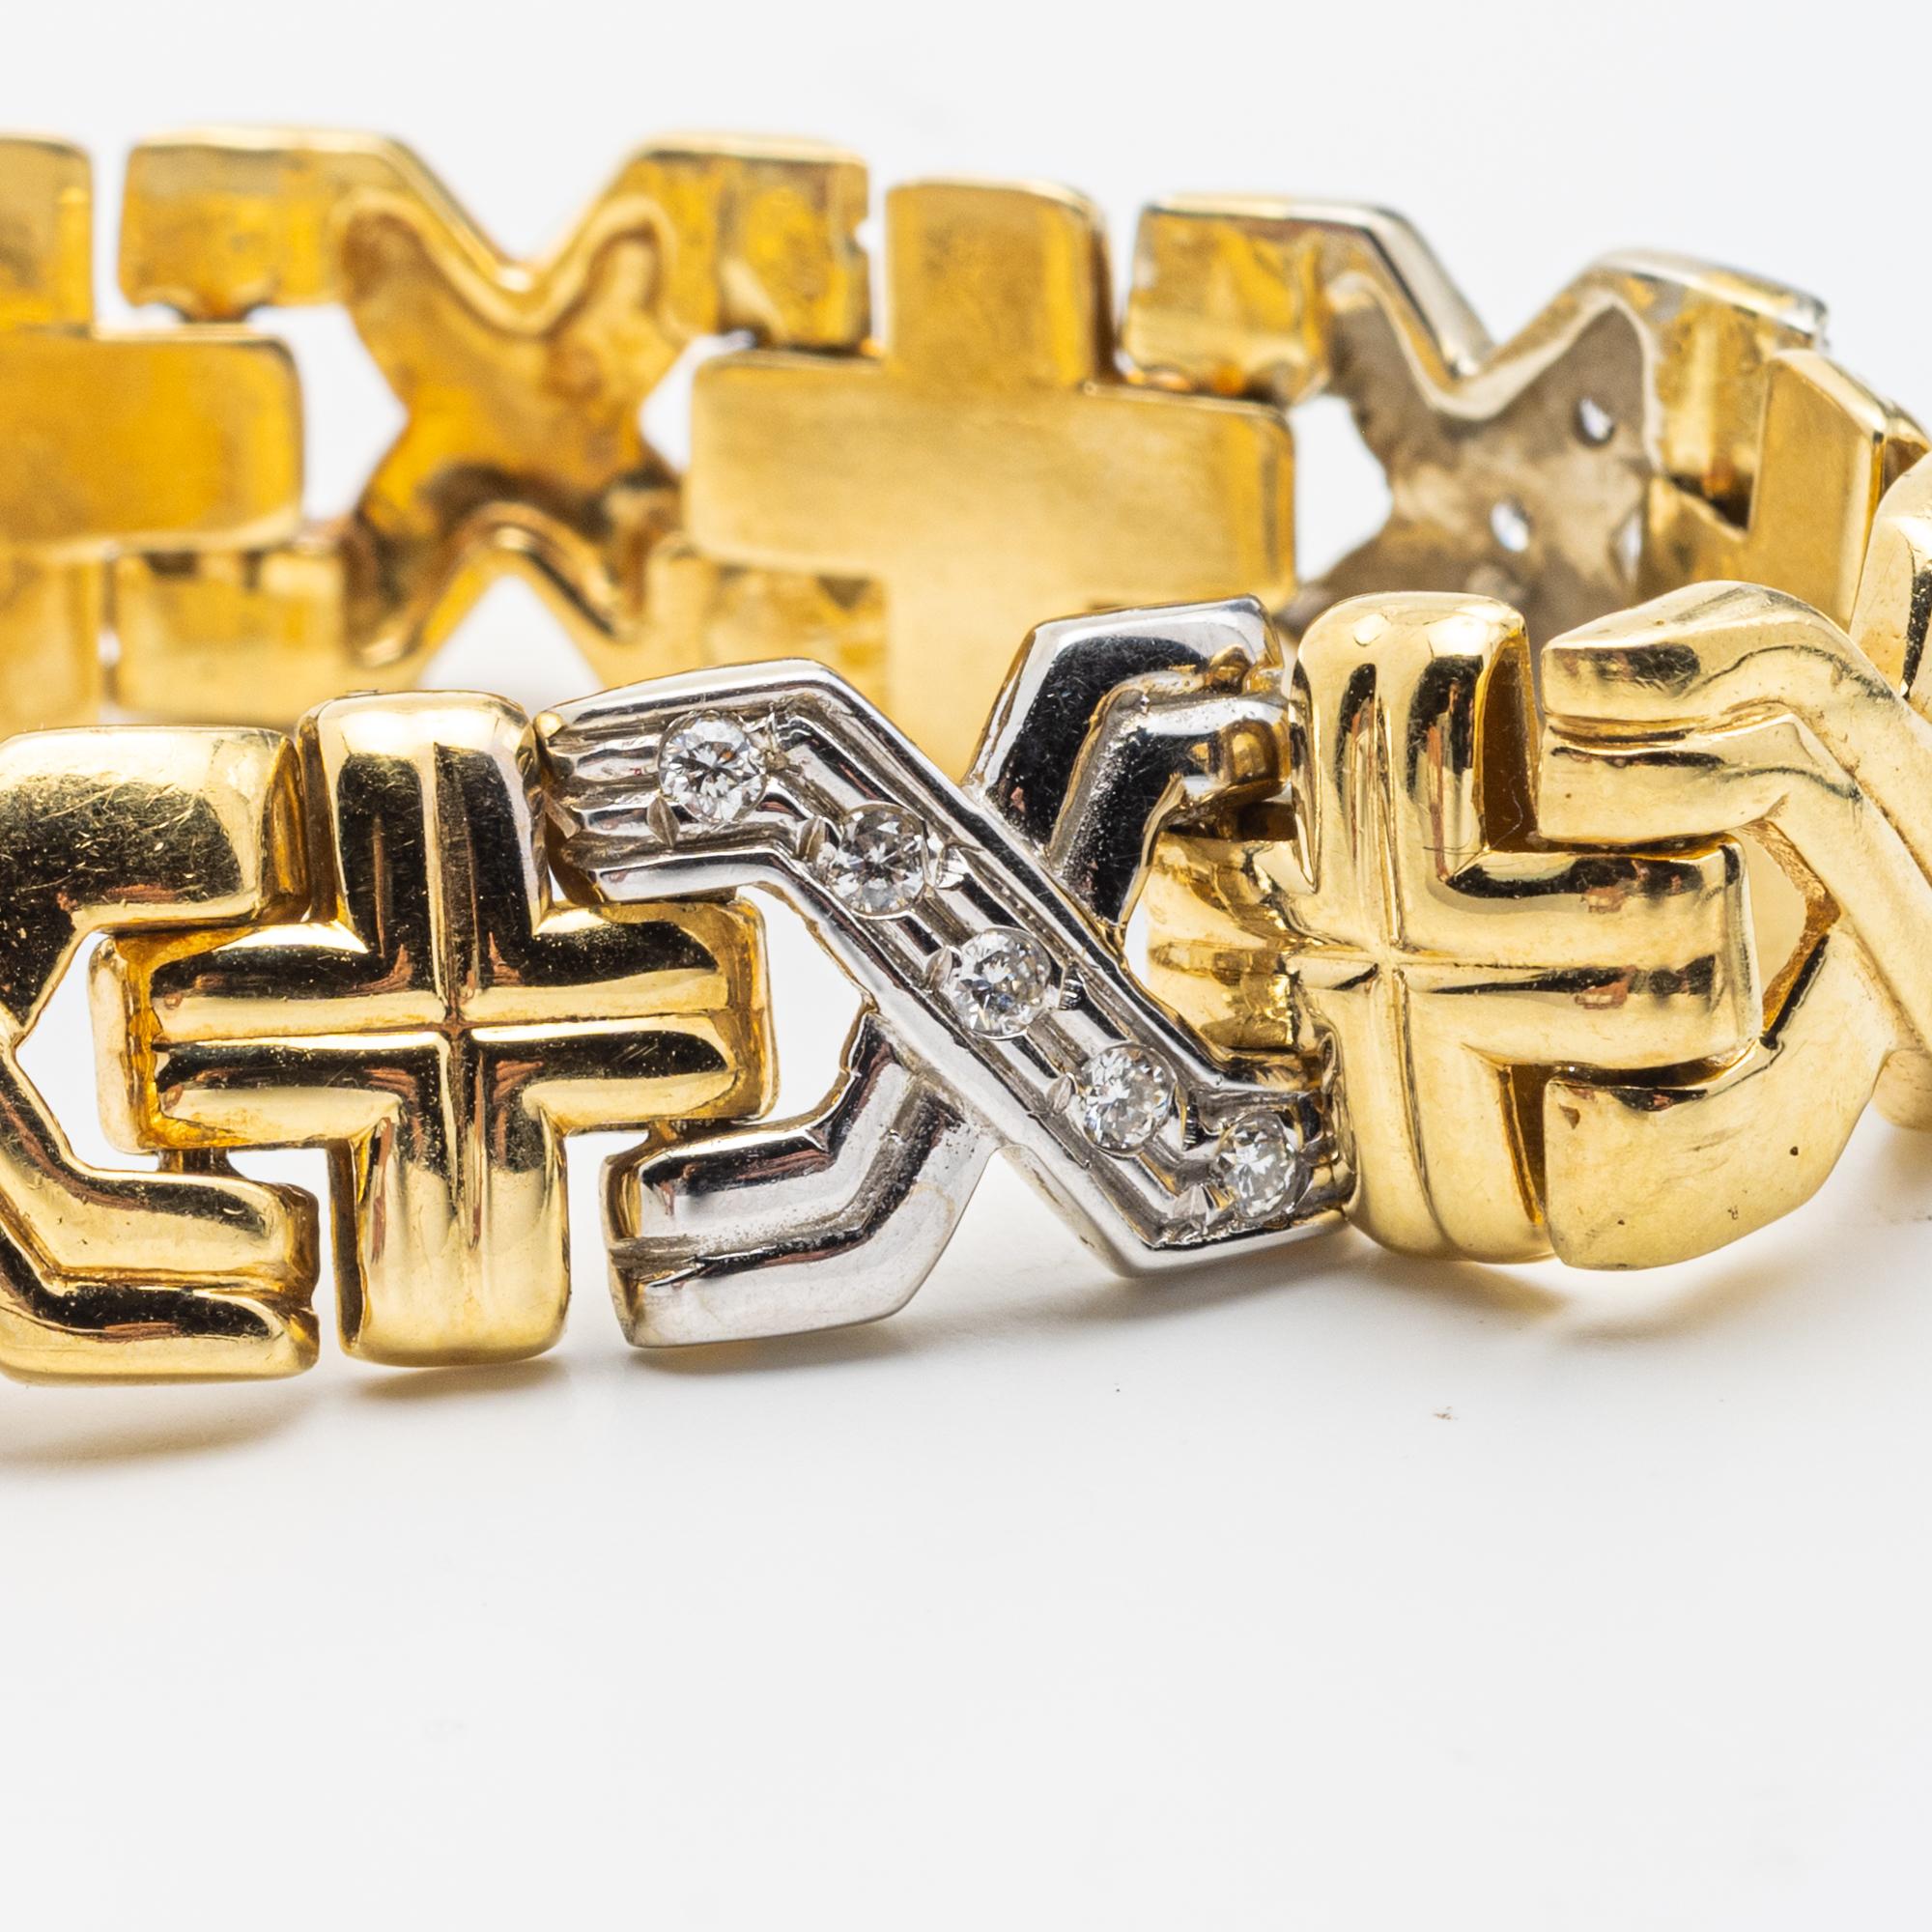 18 Karat Yellow Gold and Diamond Bracelet
Designed with x-shaped motifs, set with brilliant-cut diamonds, spaced with crosses, length approximately 7 inches, gross weight approximately 18.4 dwt, Diamonds weighing a total of approximately .75 carats